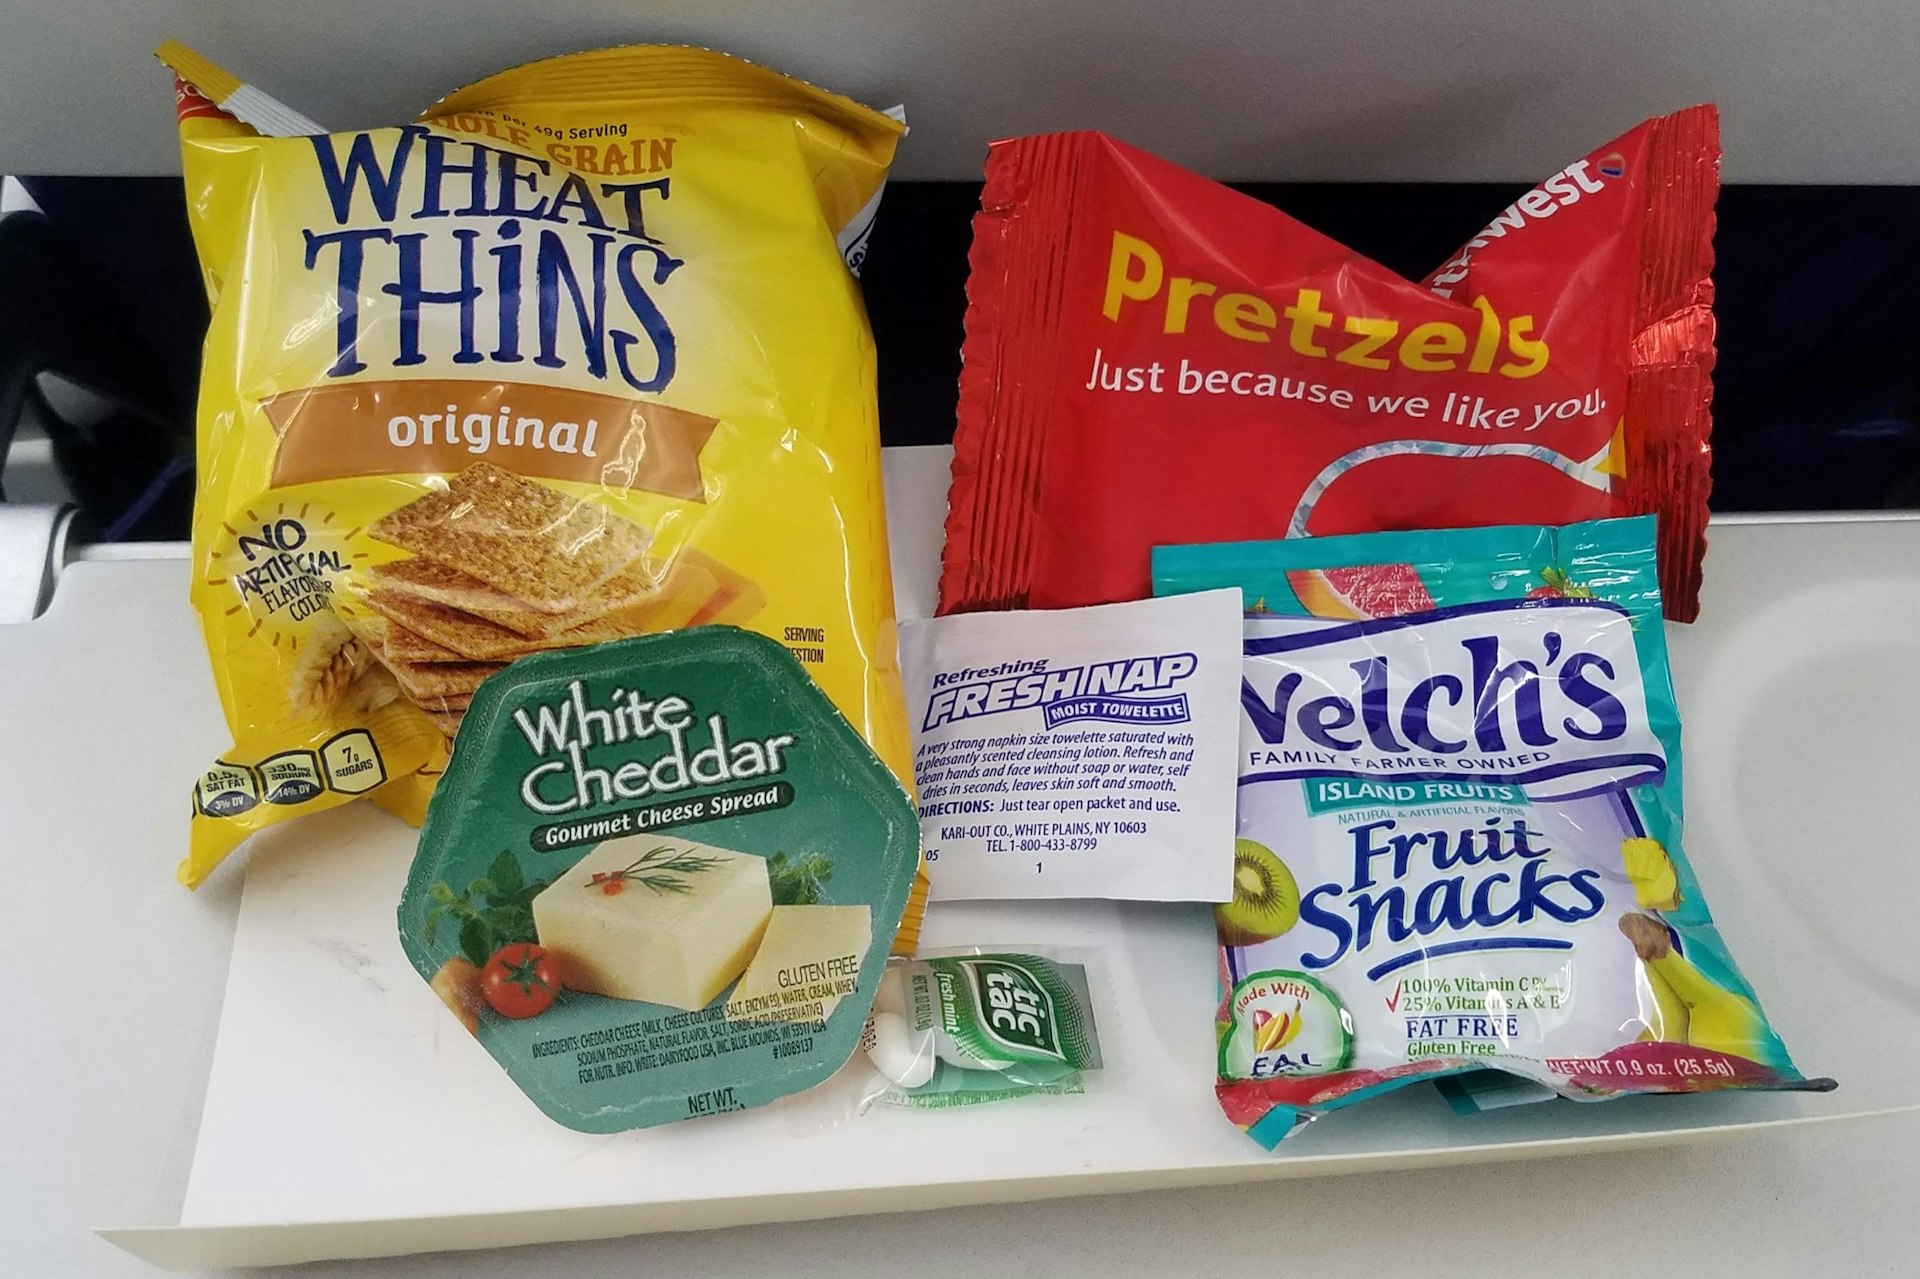 Crackers, cheese spread, pretzels and fruit chews are all that is served for Southwest flight to Hawaii lasting five hours or more.